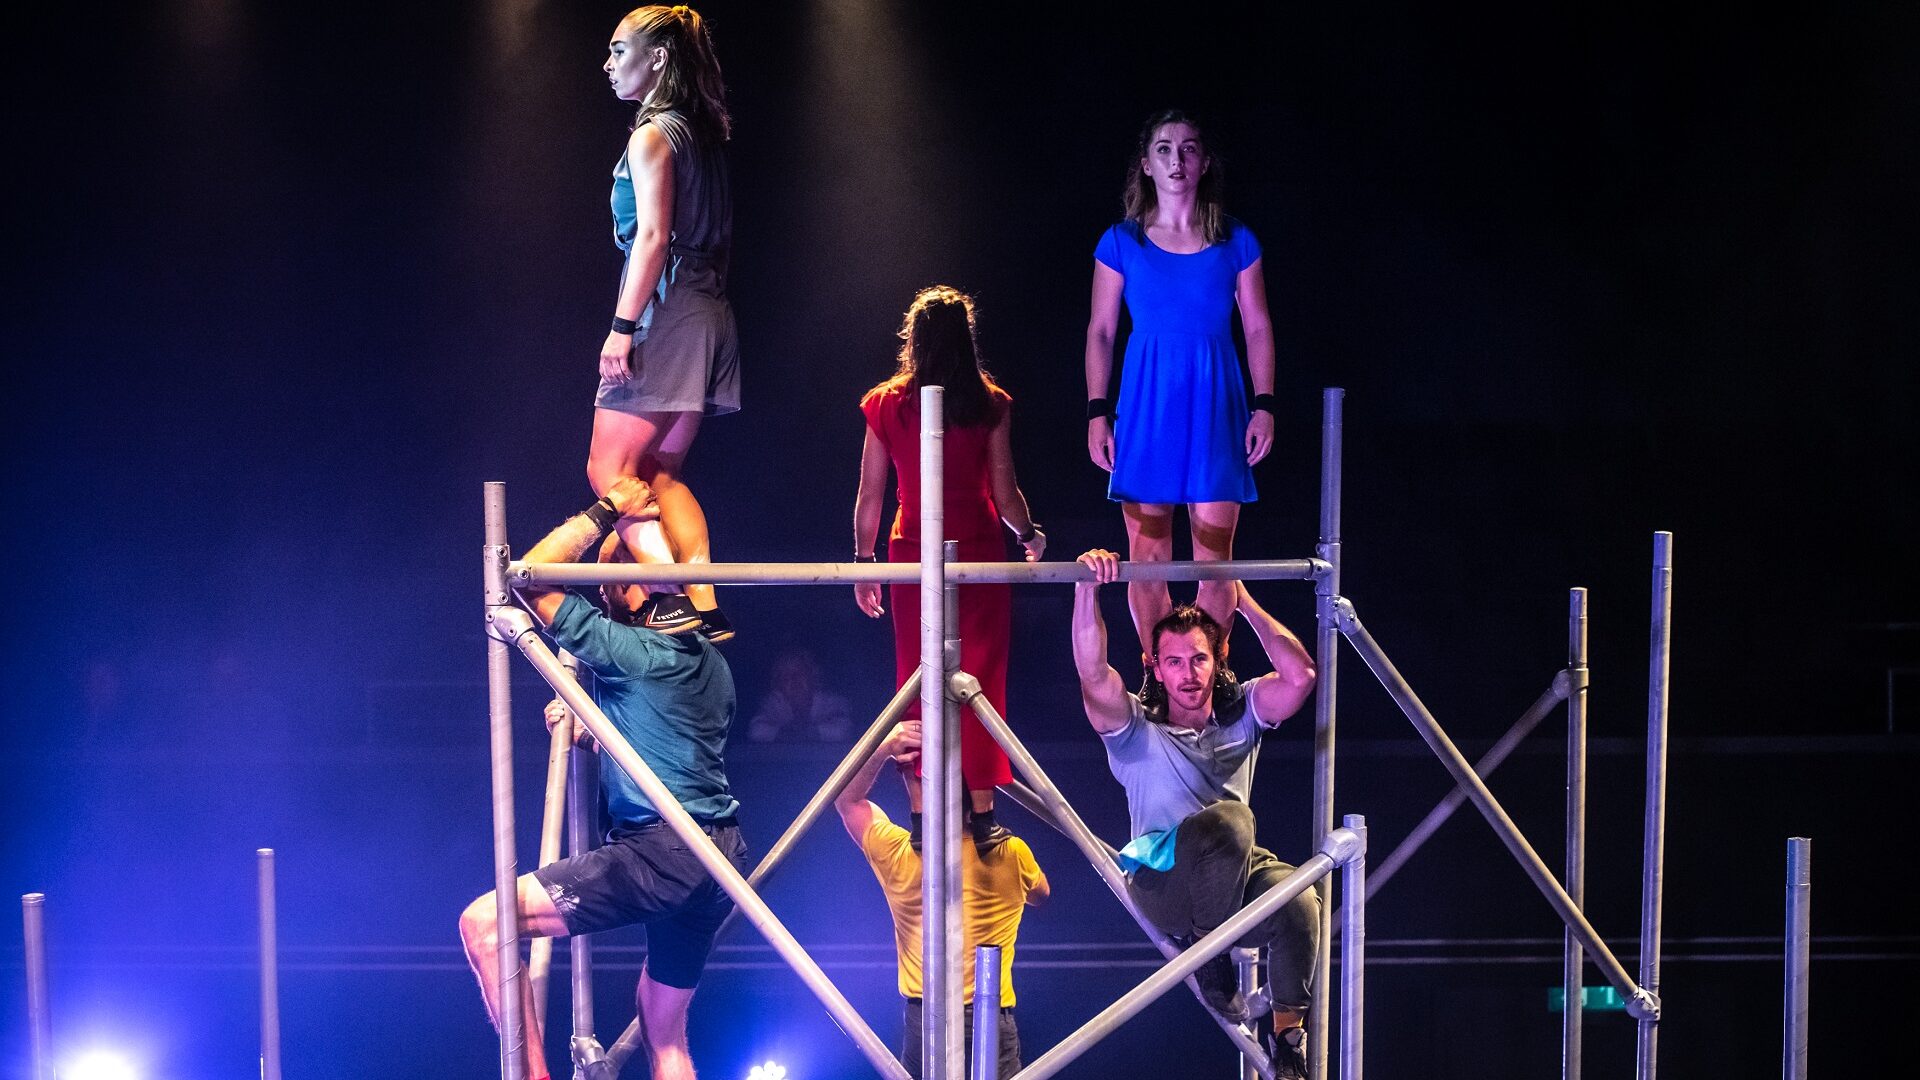 Image of performers standing on different level metal beams.